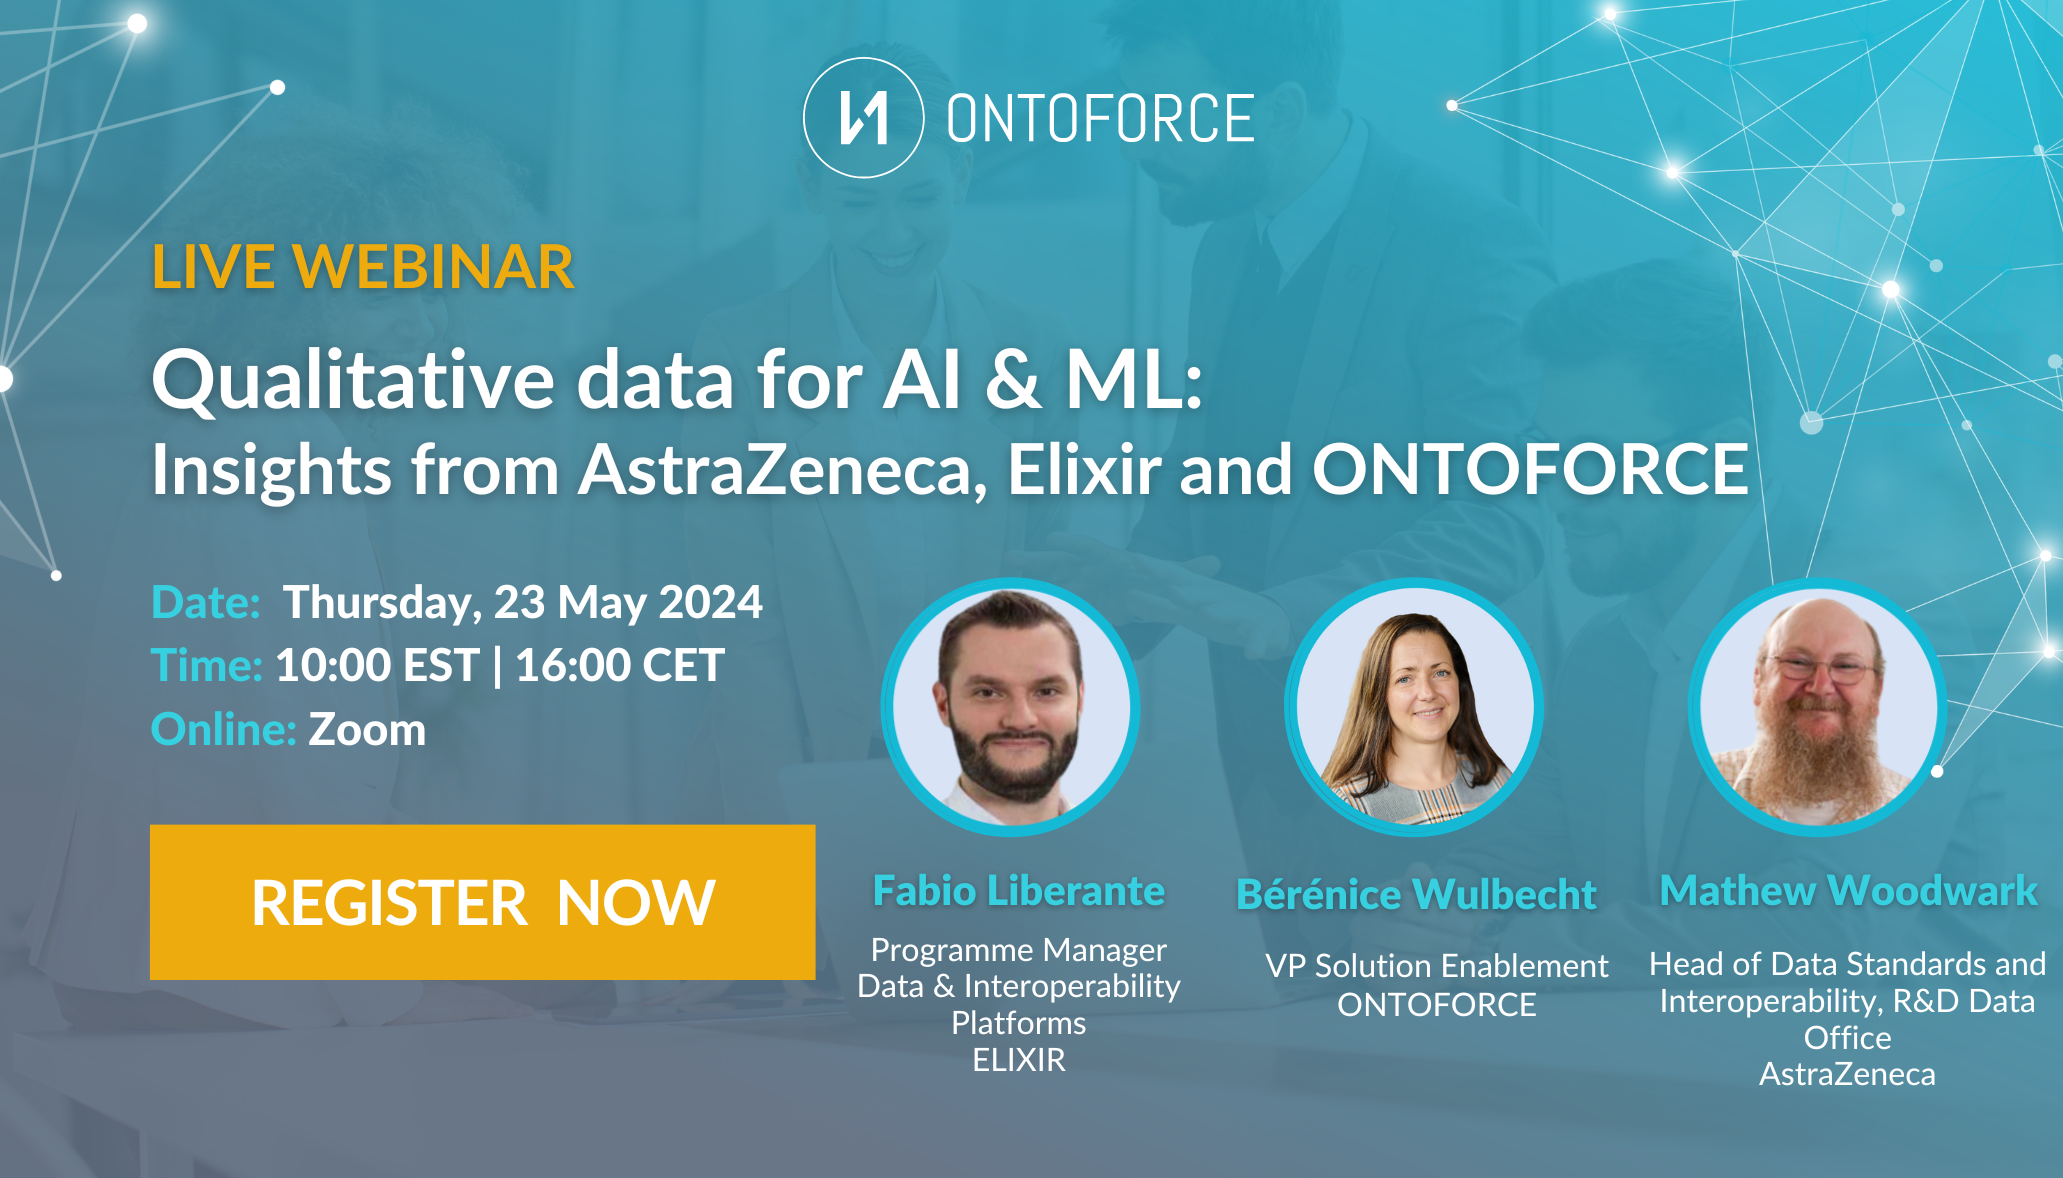 Qualitative data for AI & ML: Insights from AstraZeneca, Elixir and ONTOFORCE